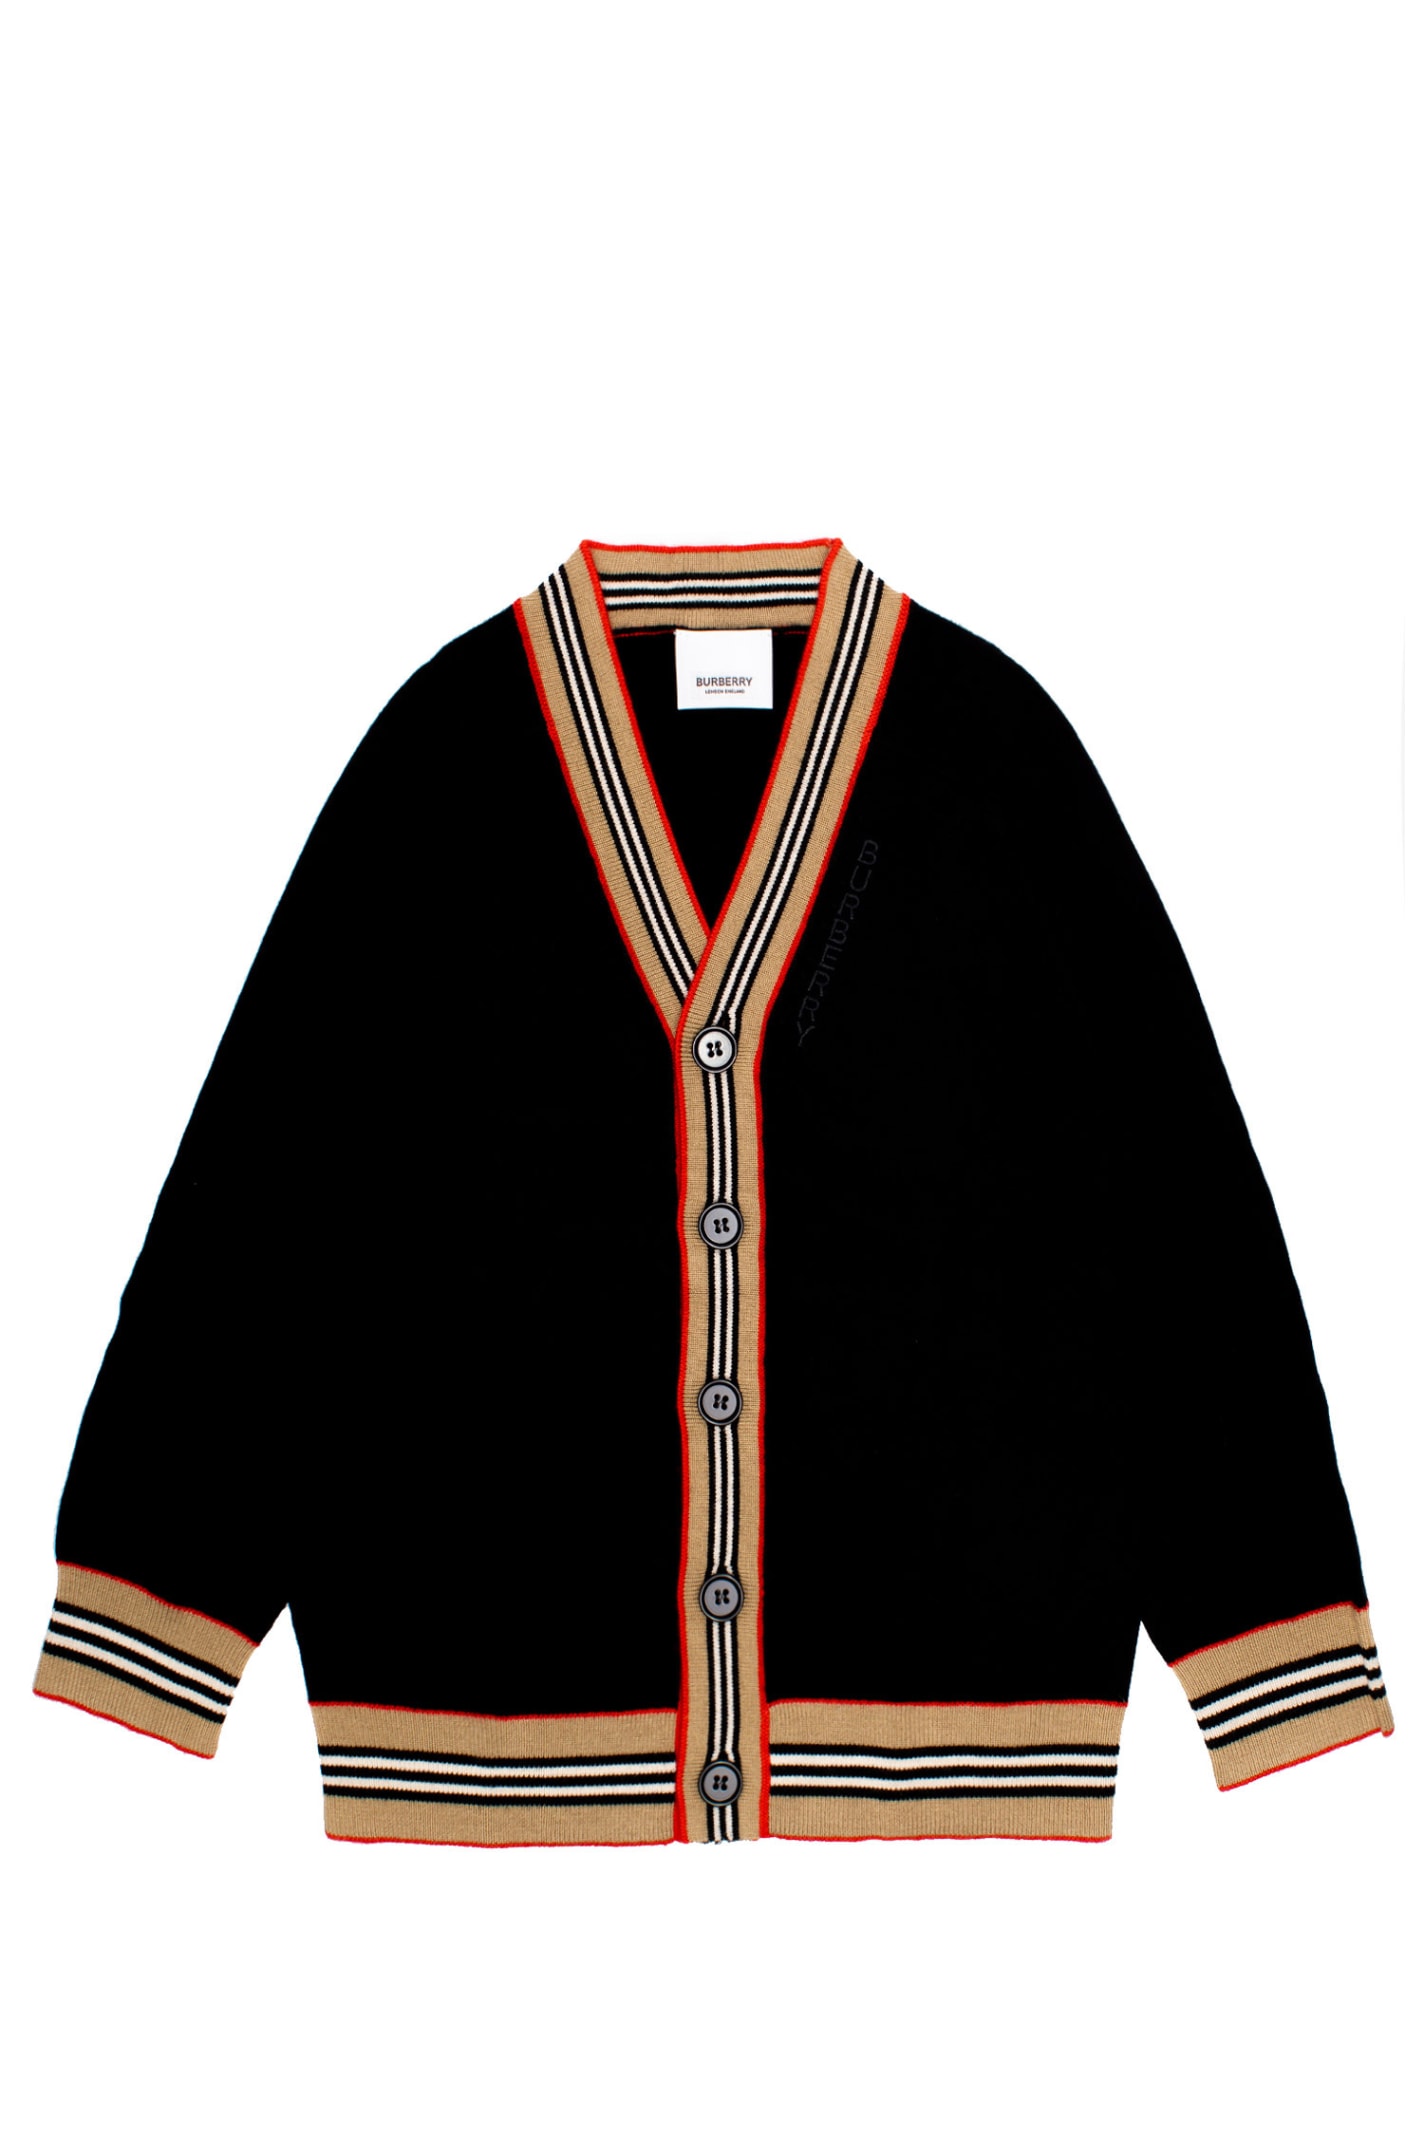 Burberry Wool Cardigan With Iconic Stripe Pattern Finish